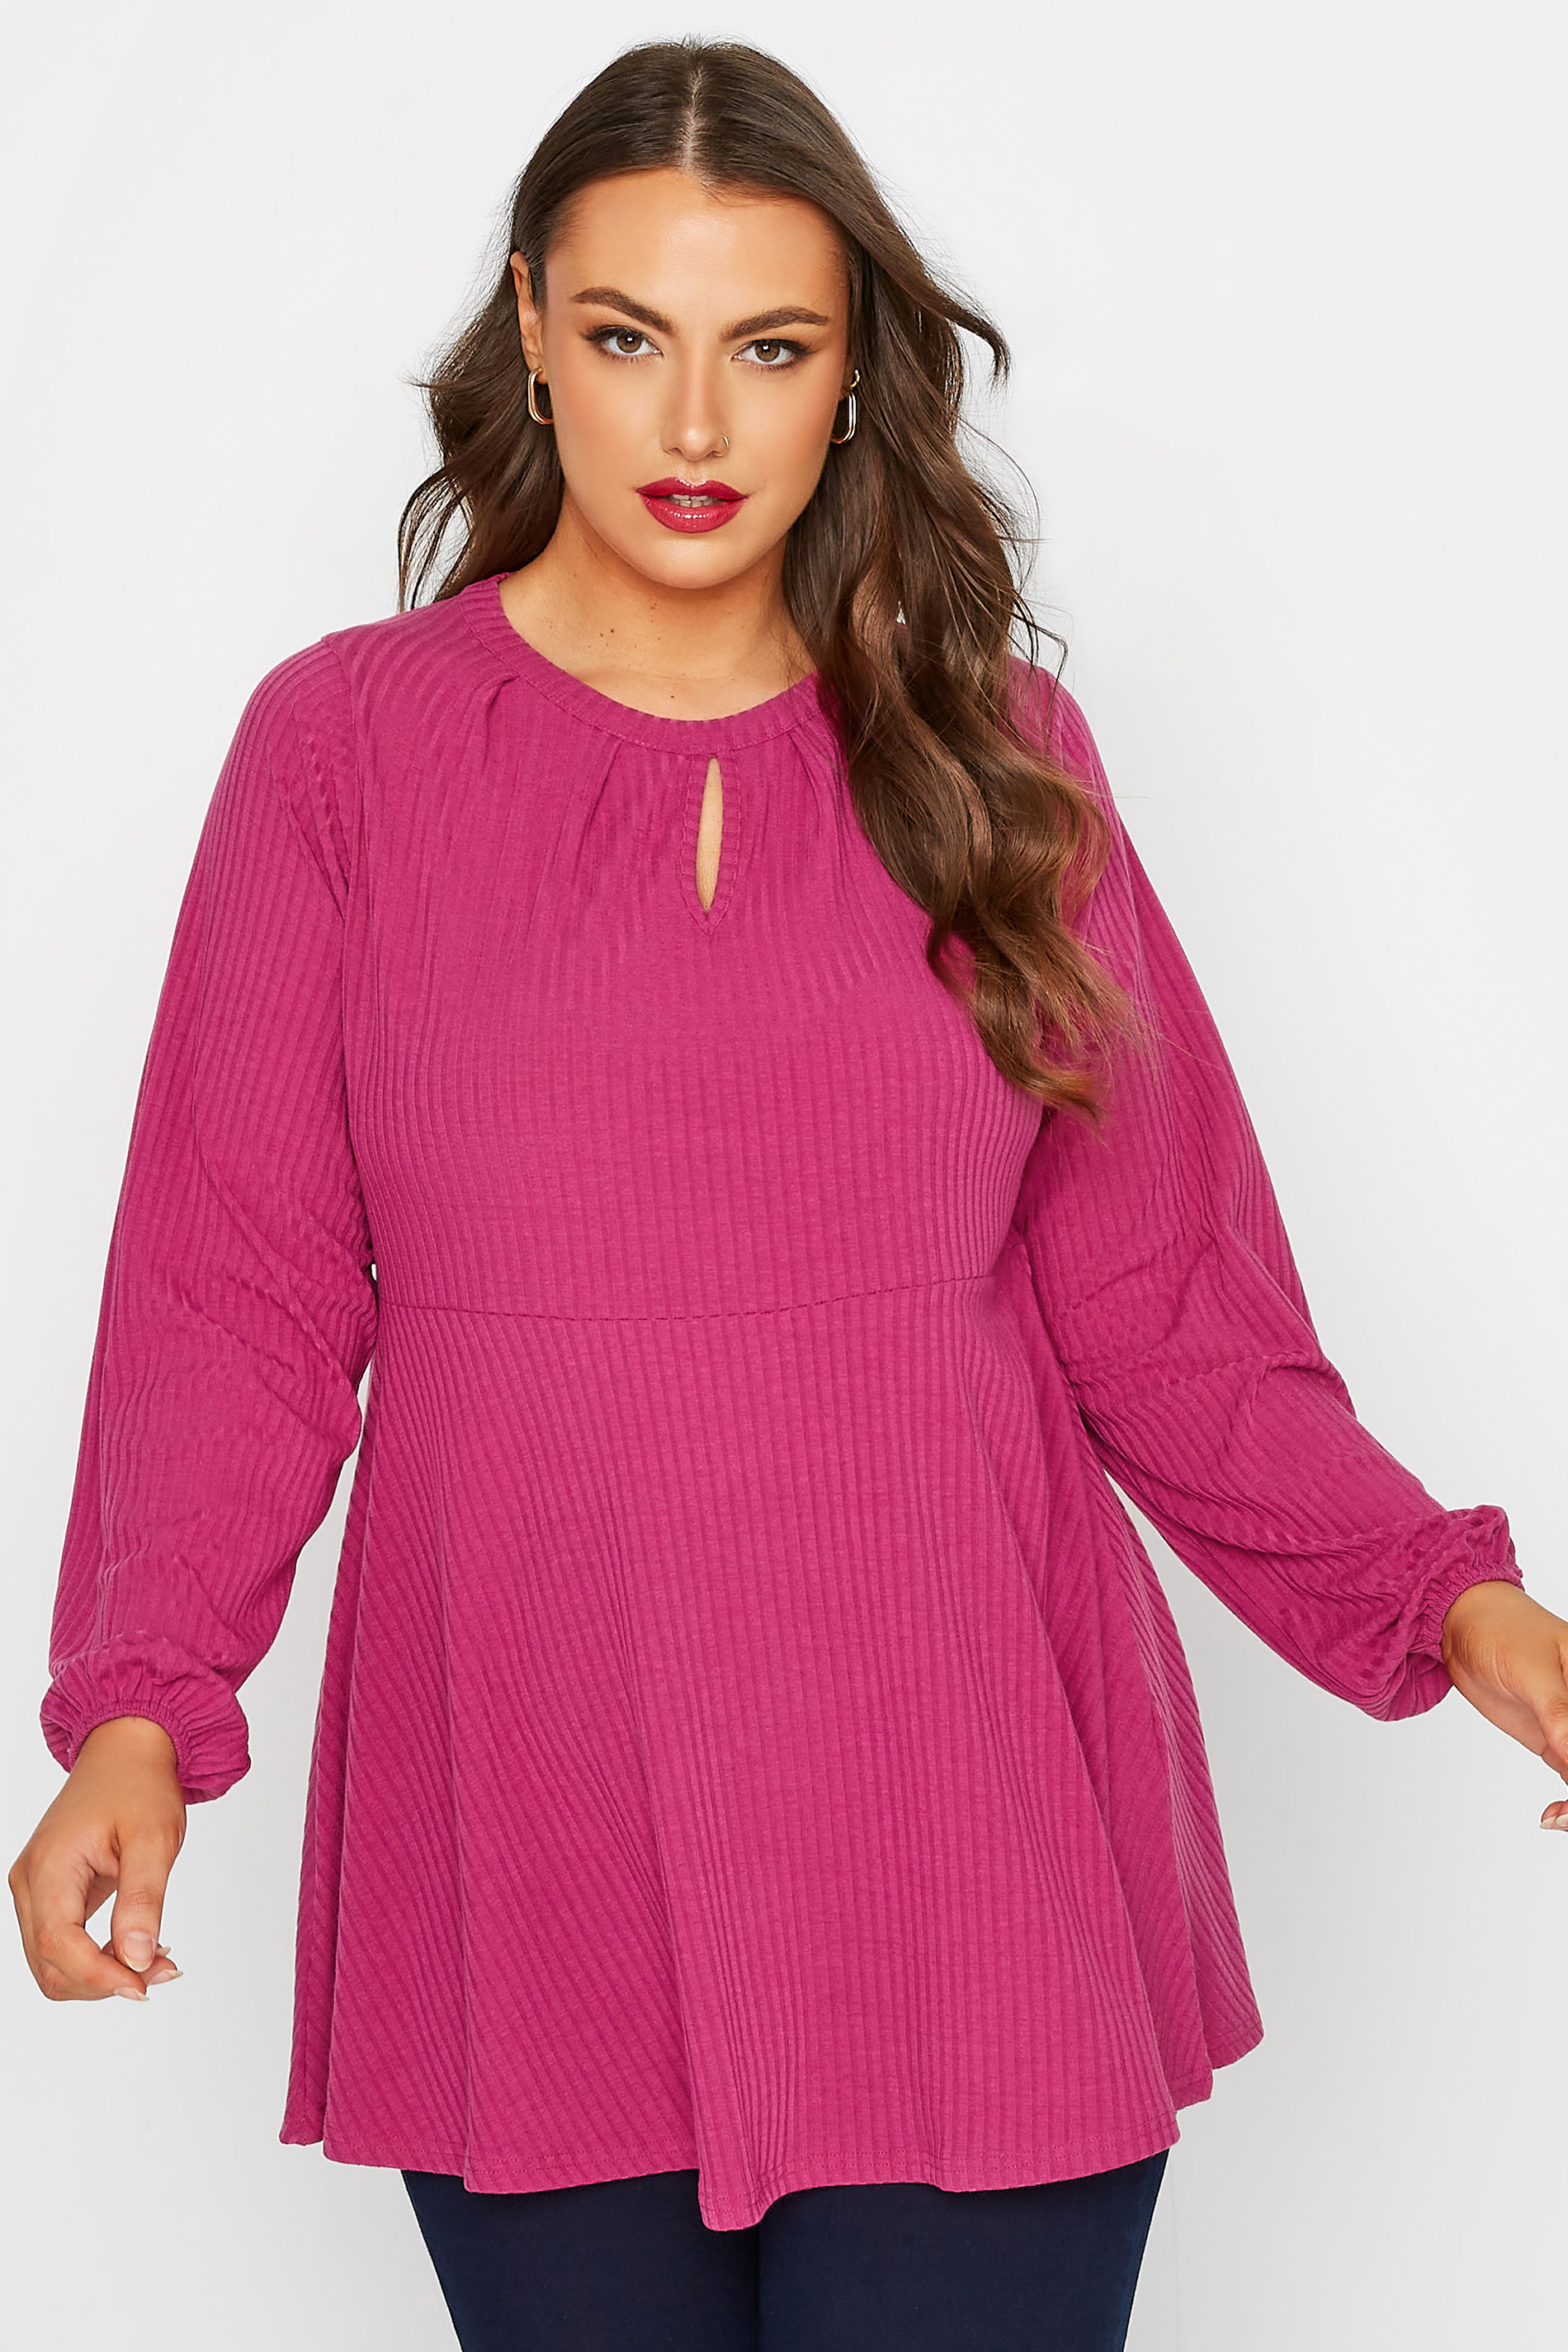 LIMITED COLLECTION Plus Size Pink Peplum Keyhole Top | Yours Clothing  1